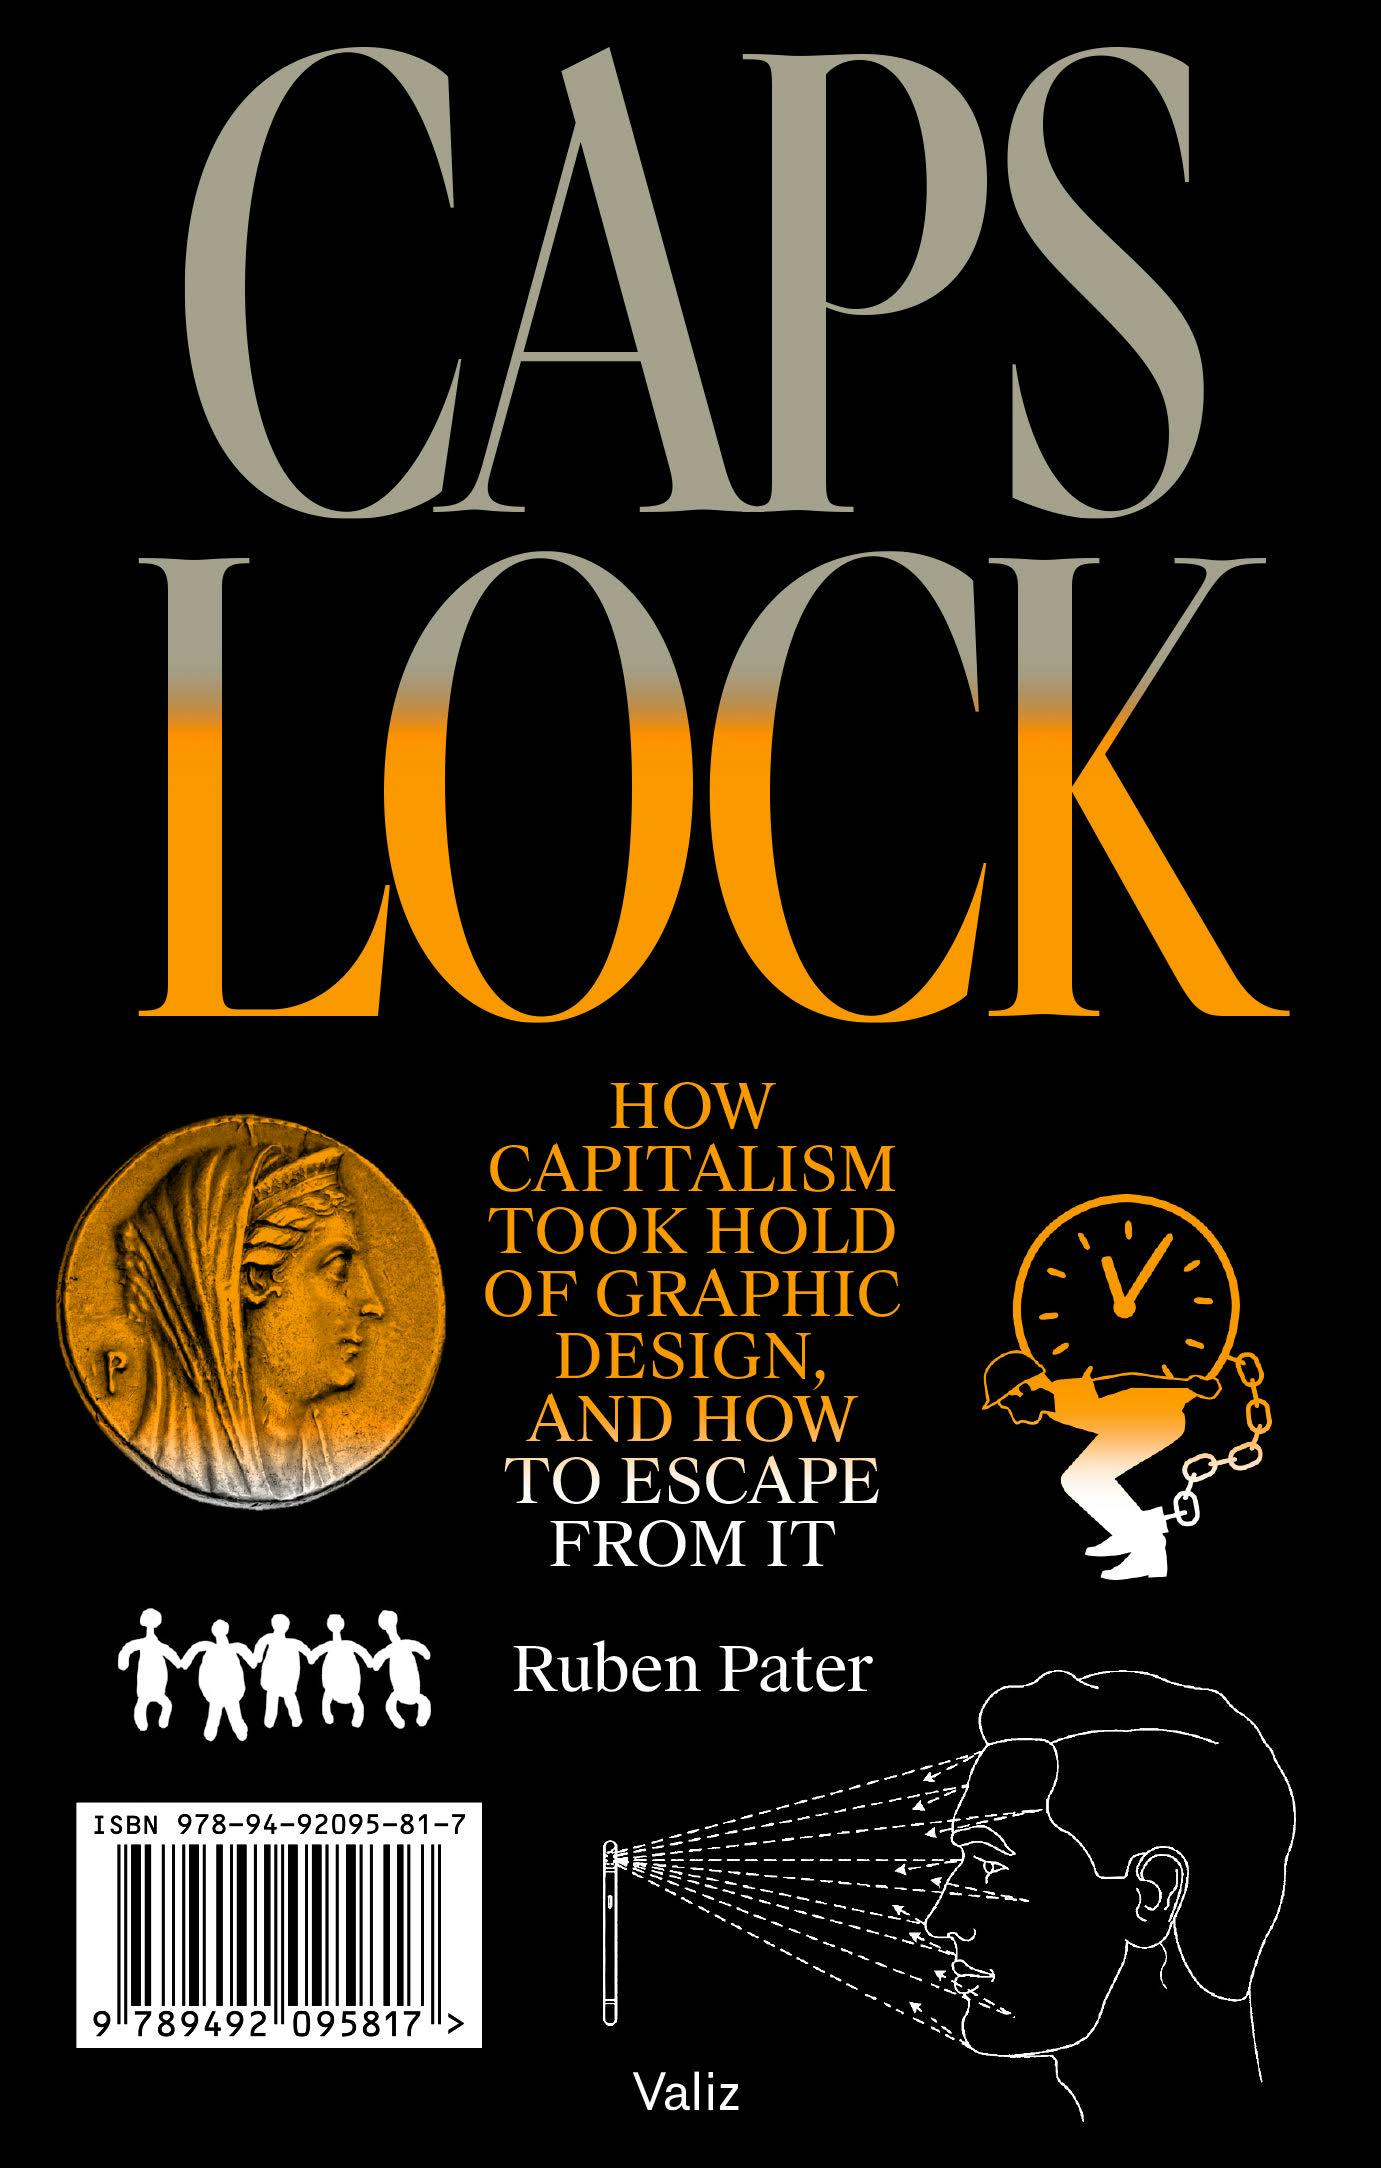 The media cover for “CAPS LOCK” by Ruben Pater